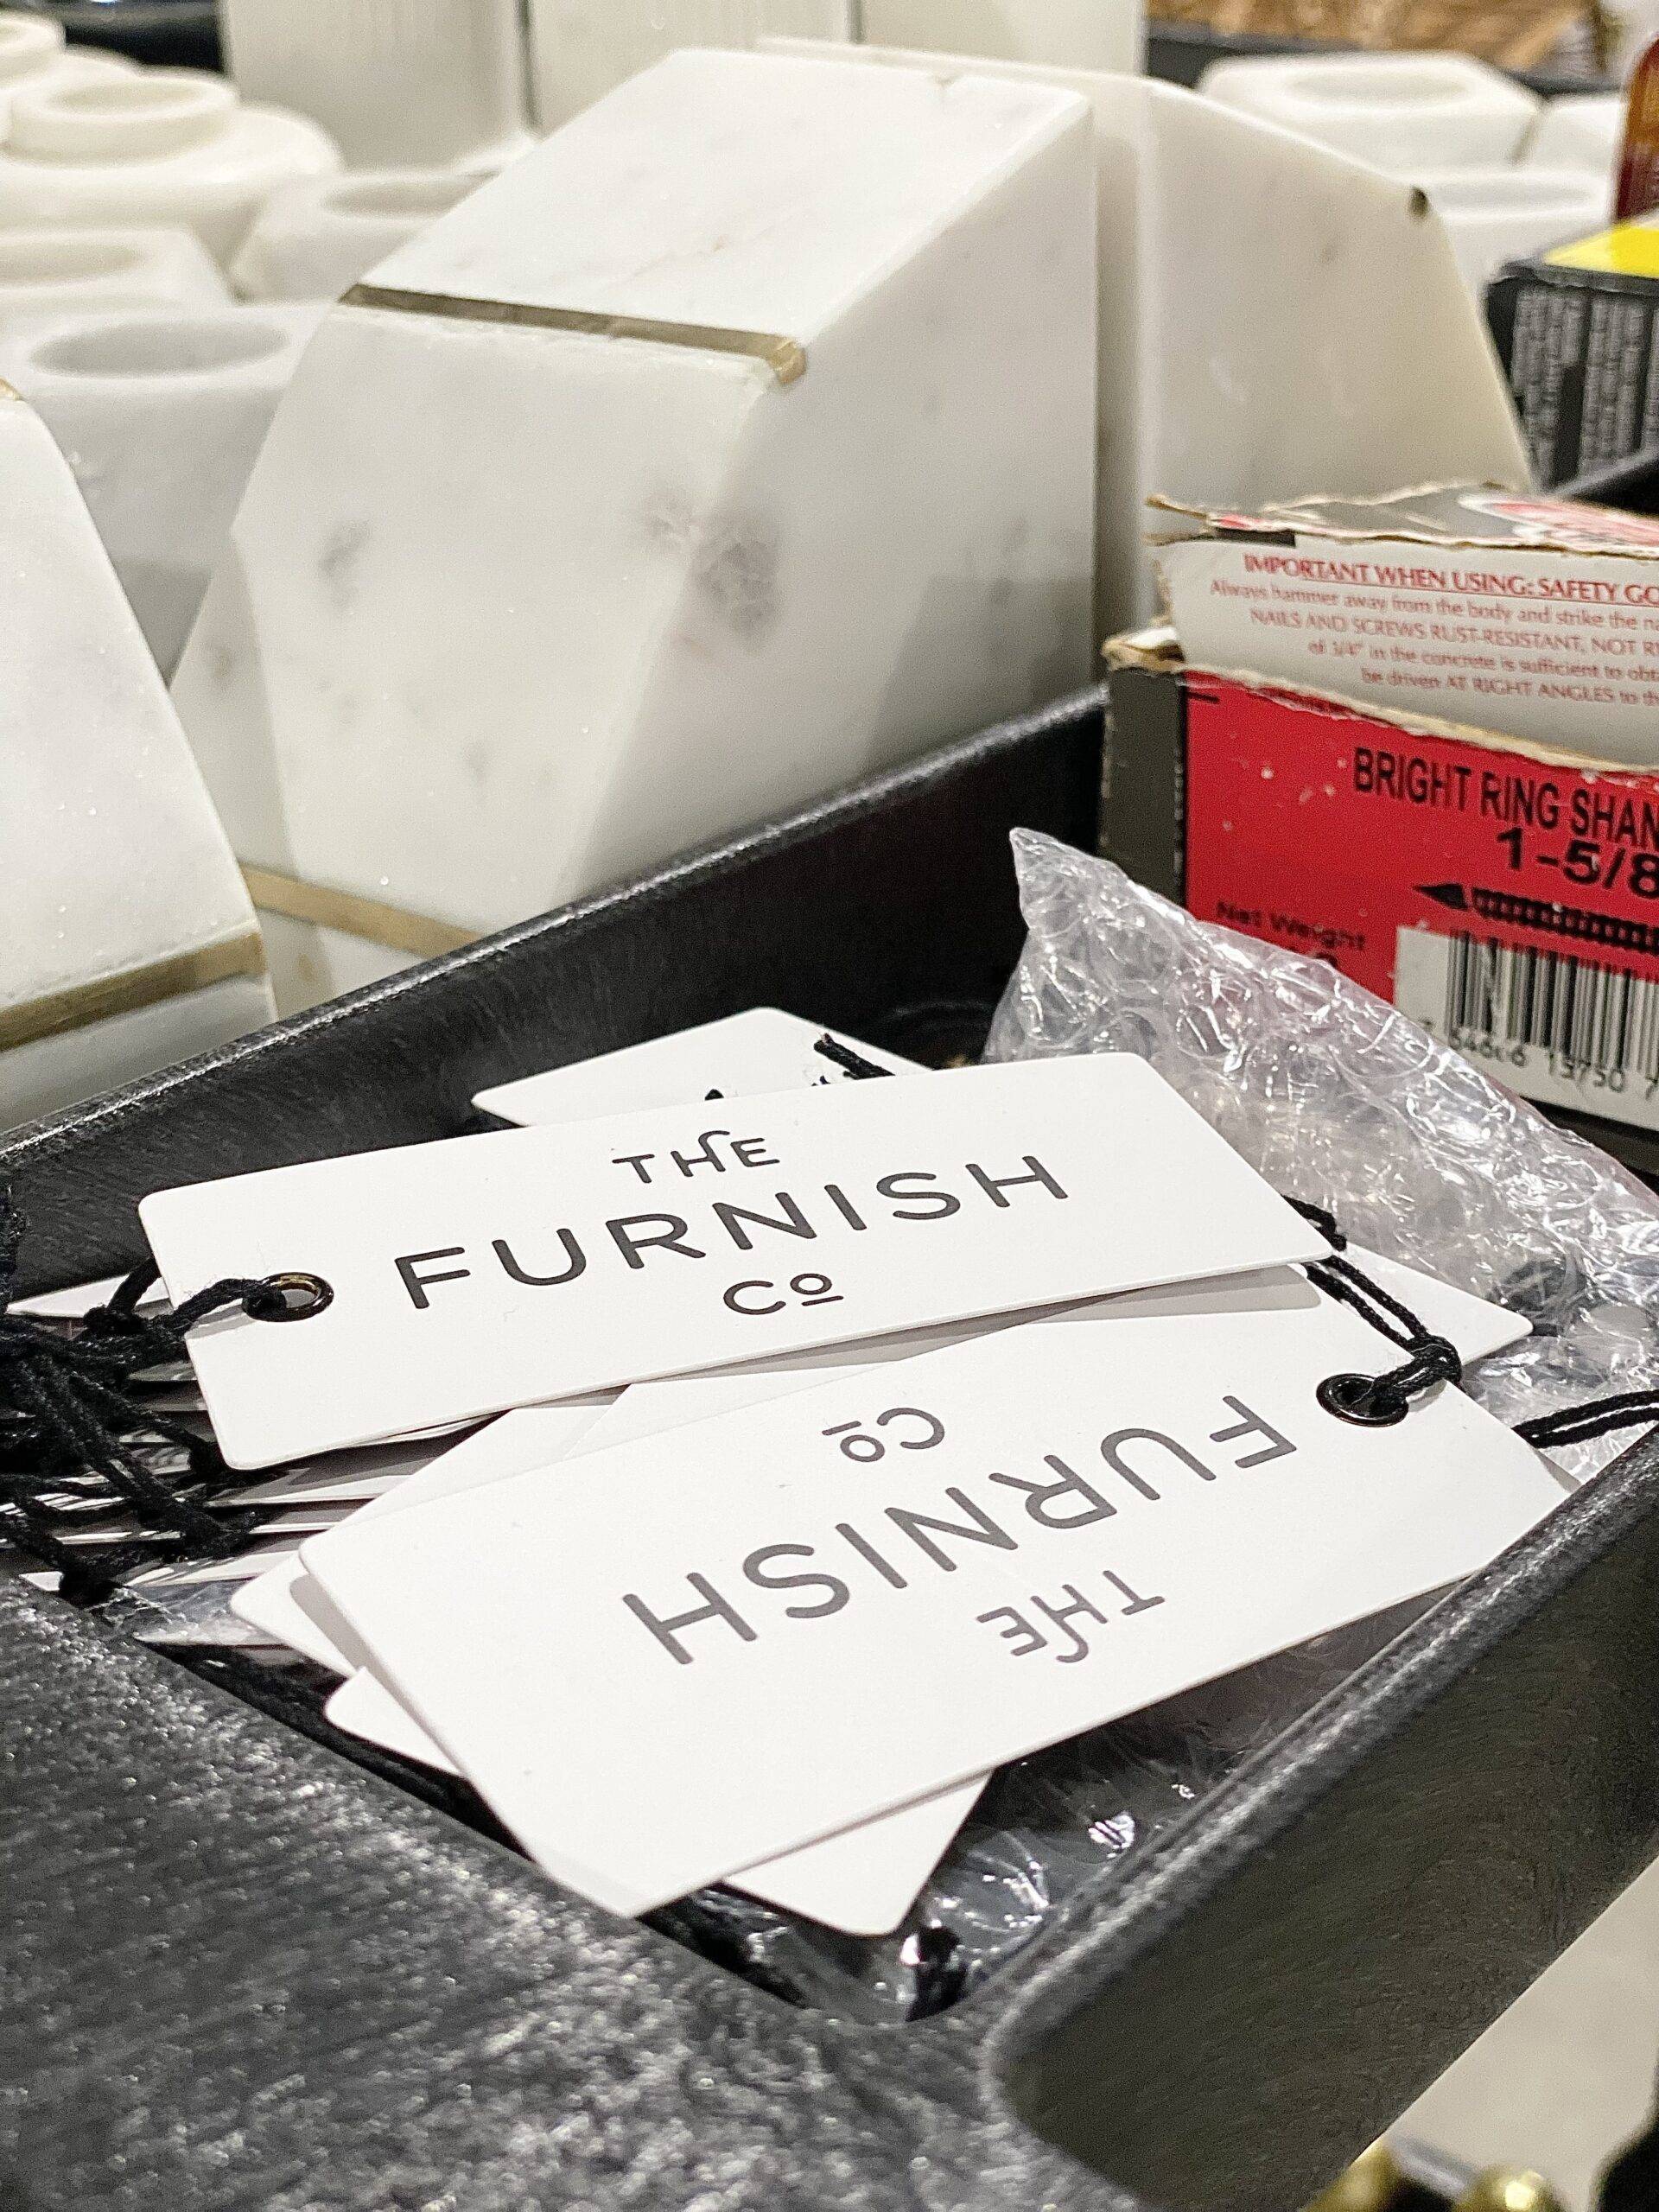 The Furnish Co will open its warehouse doors at 8 a.m. for an exclusive sales event for quality, high-end, affordable furniture and home decor. Shoppers will be able to select items to pay for and take home that day.